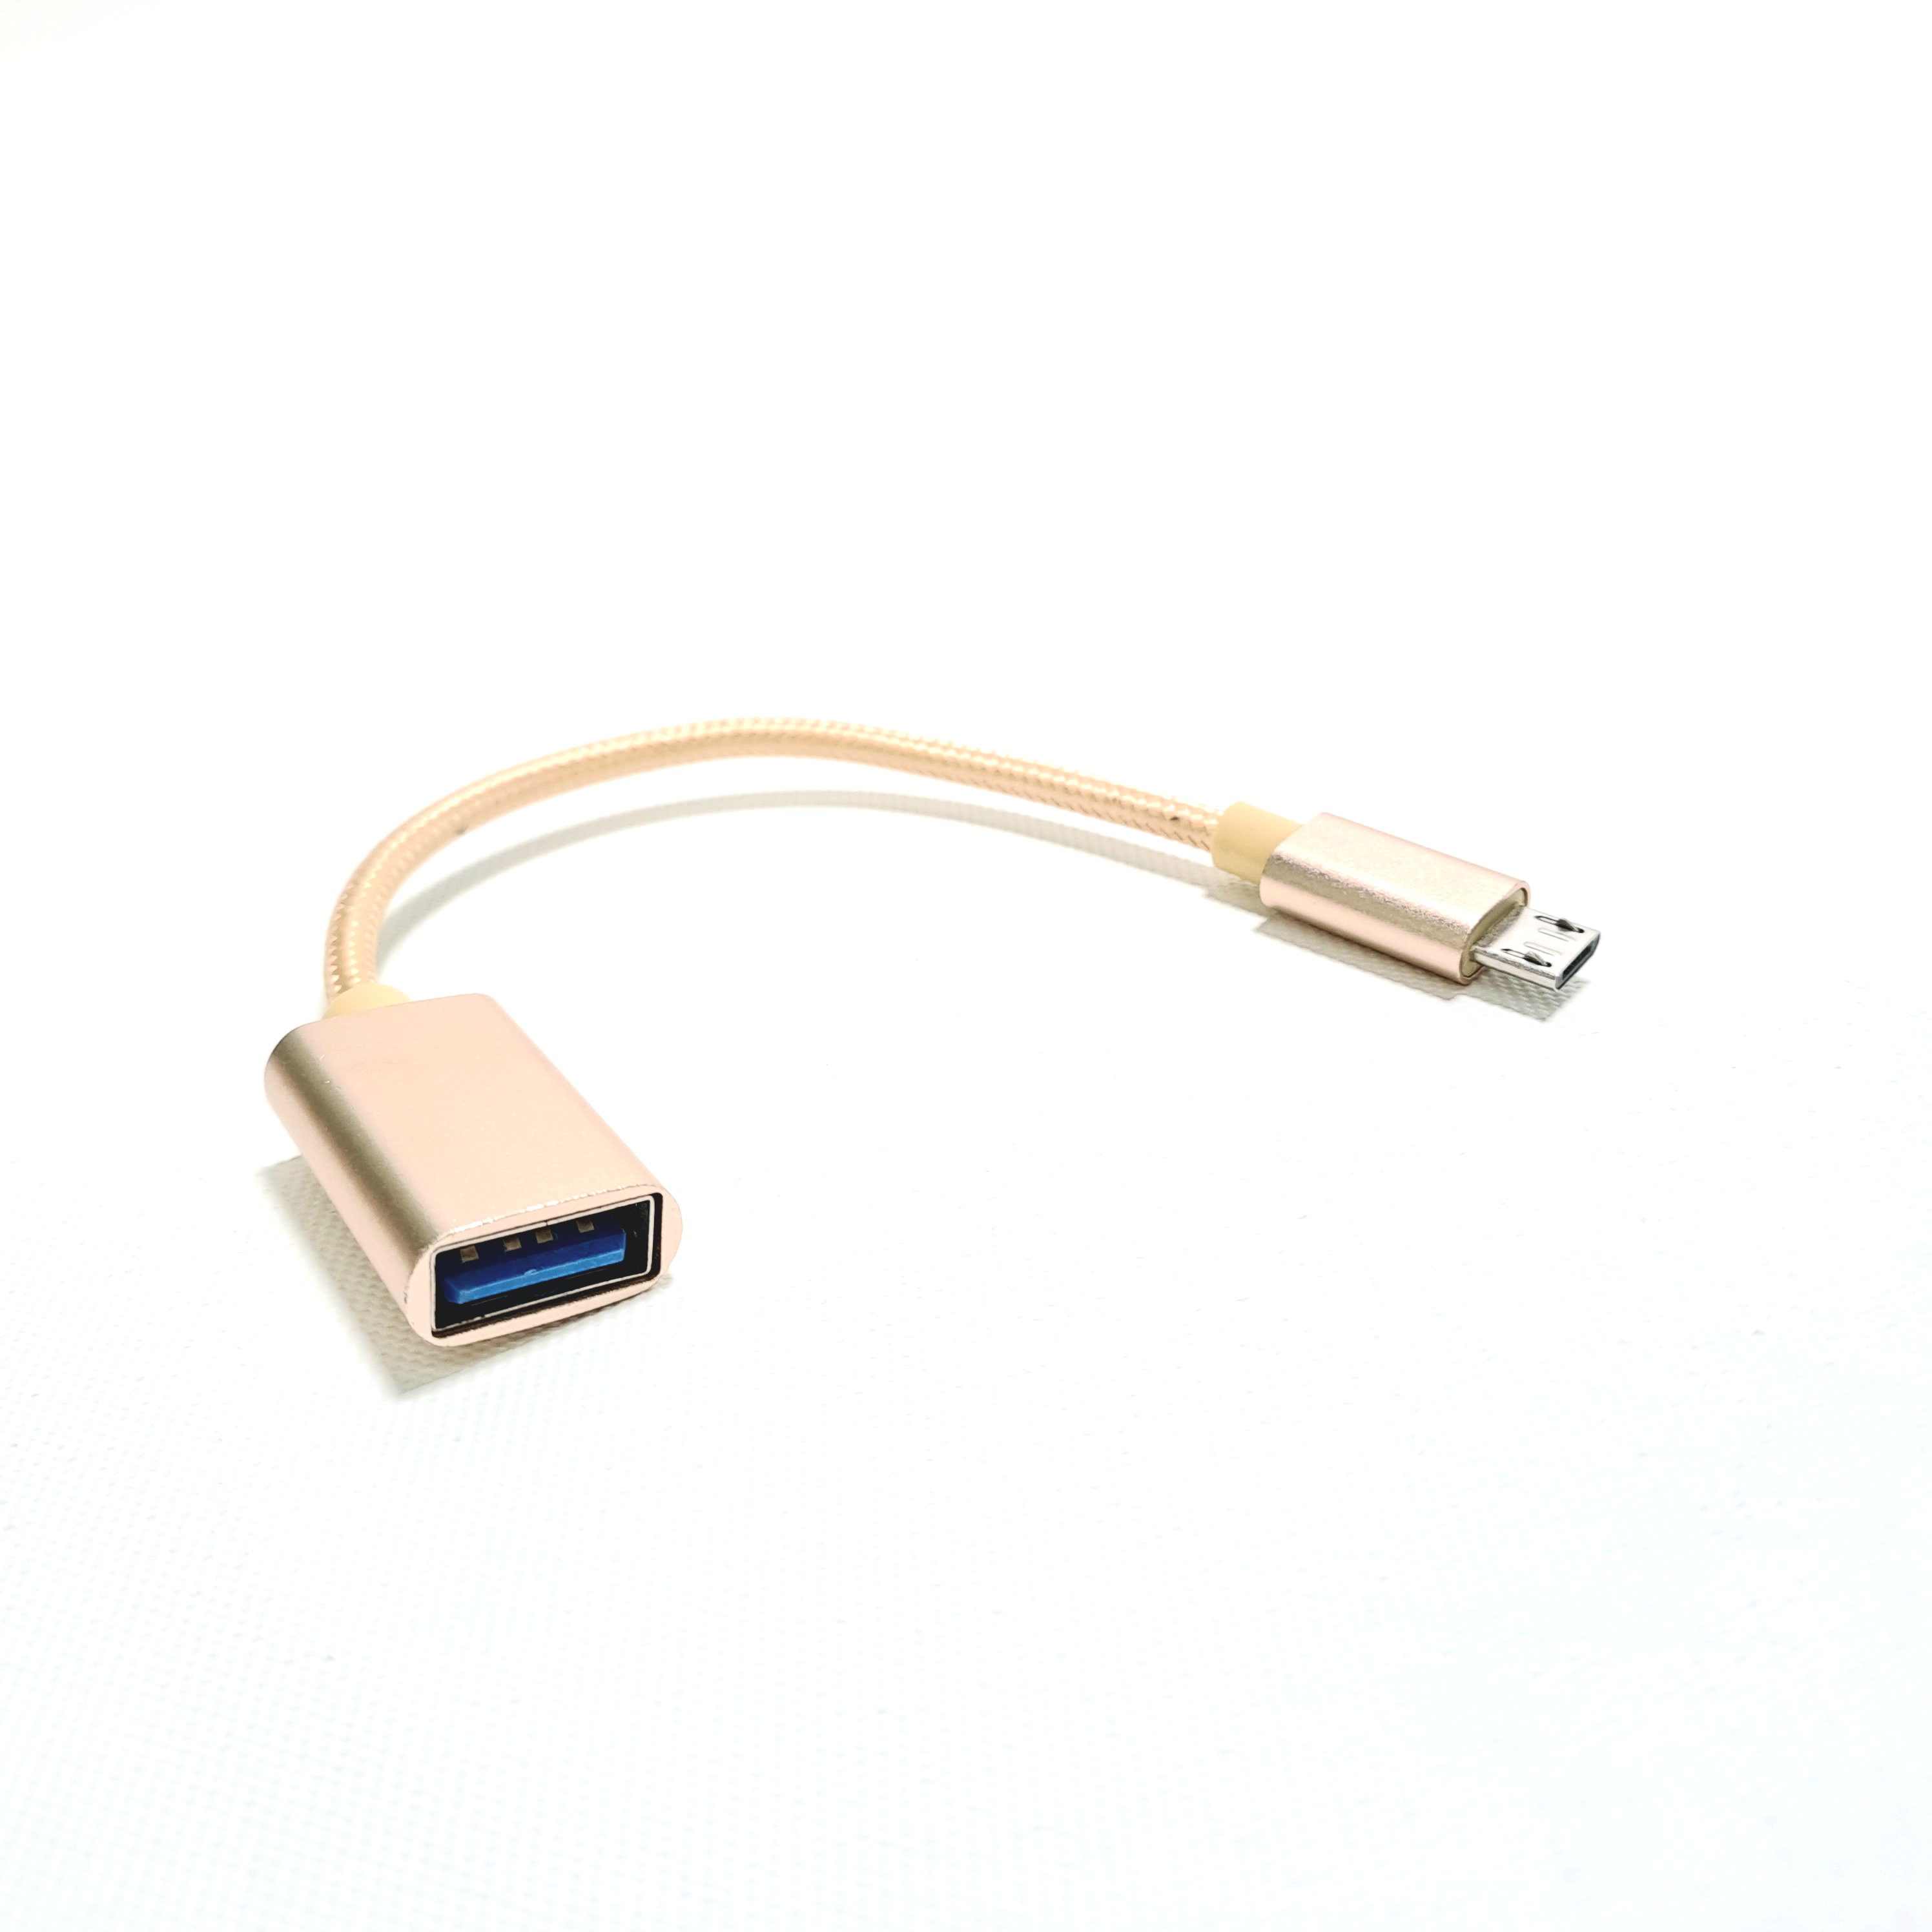 USB AF to Micro USB OTG cable